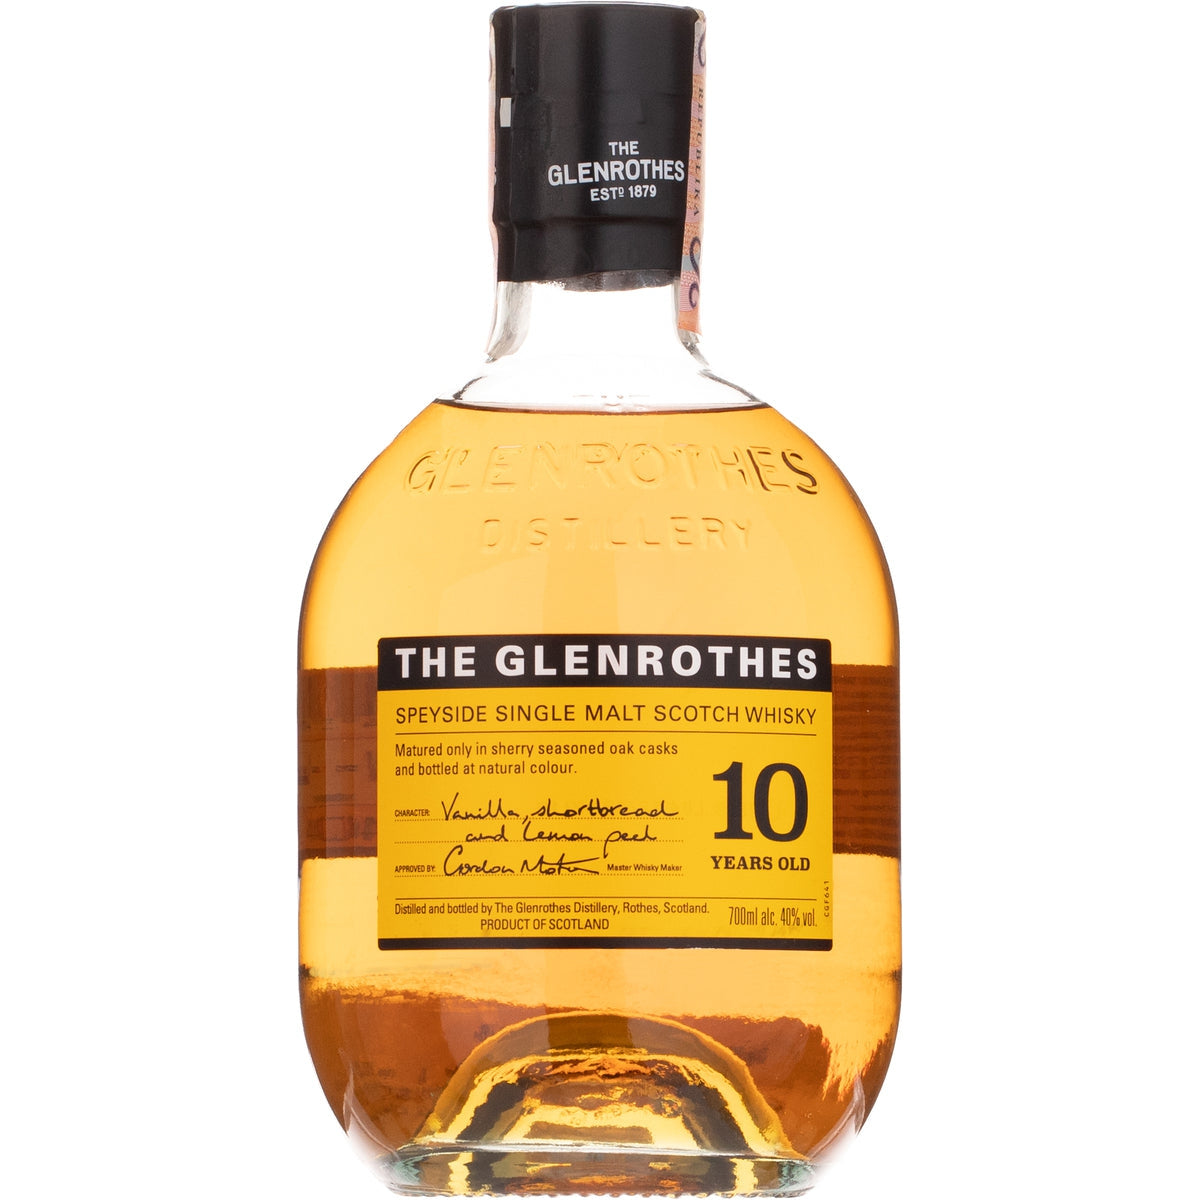 The Glenrothes 10 Years Old Speyside Single Malt 40% Vol. 0,7l in Giftbox